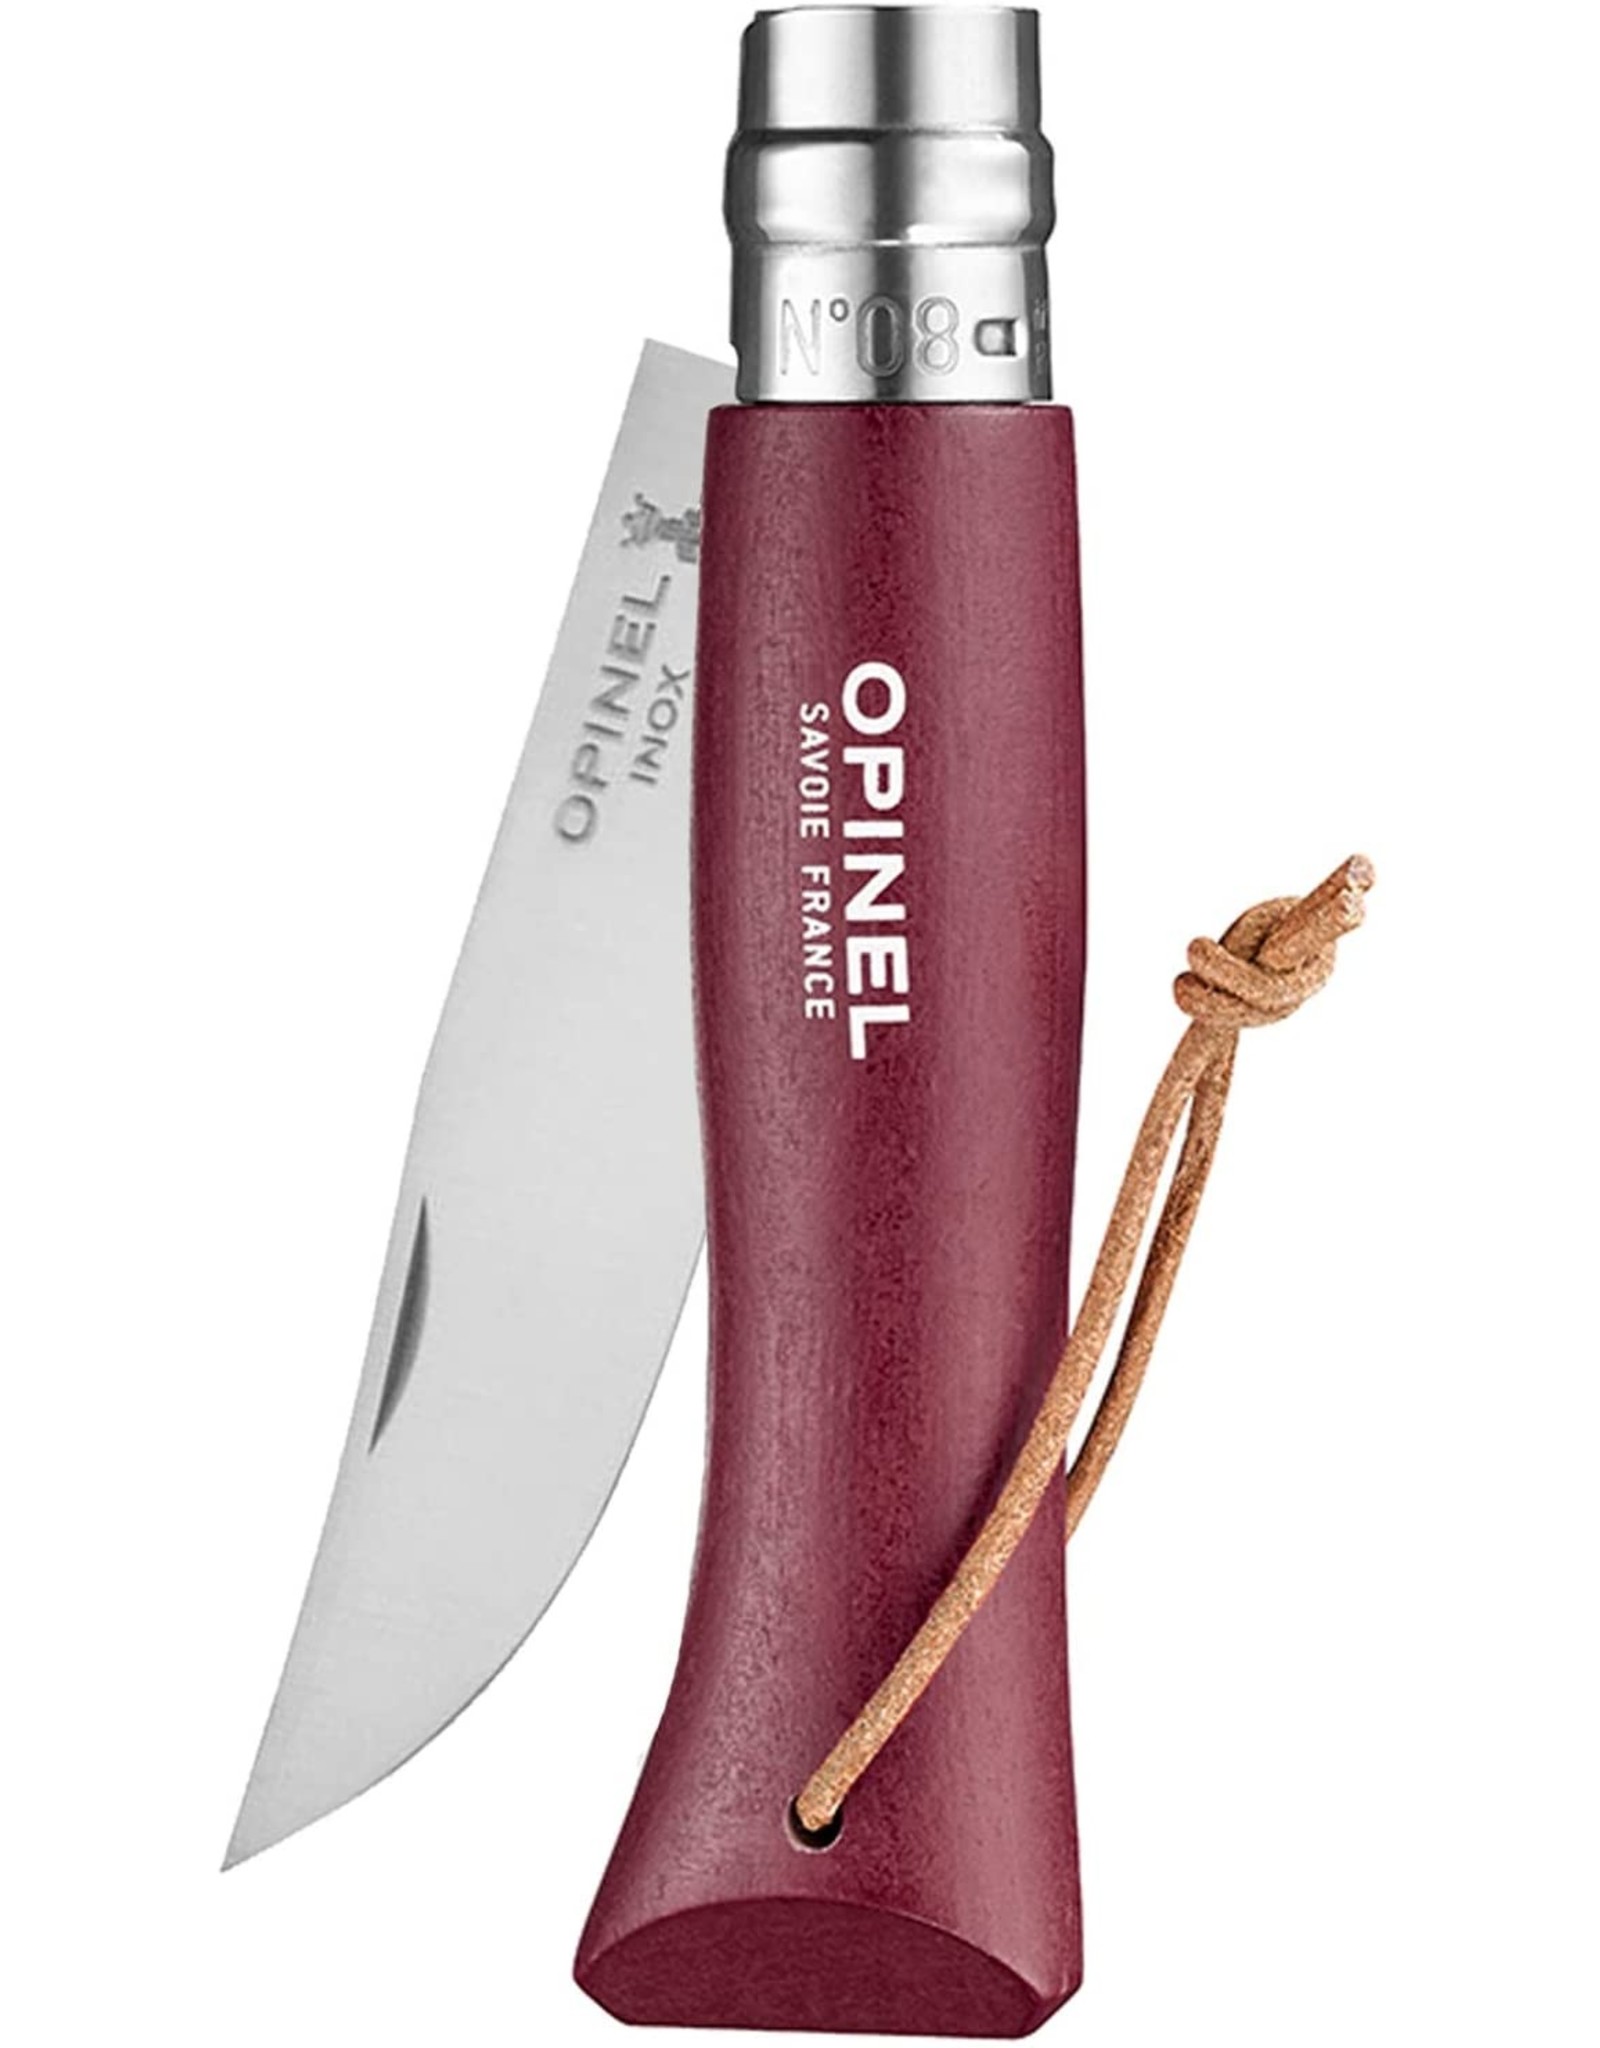 Opinel No. 8 Colorama Knife